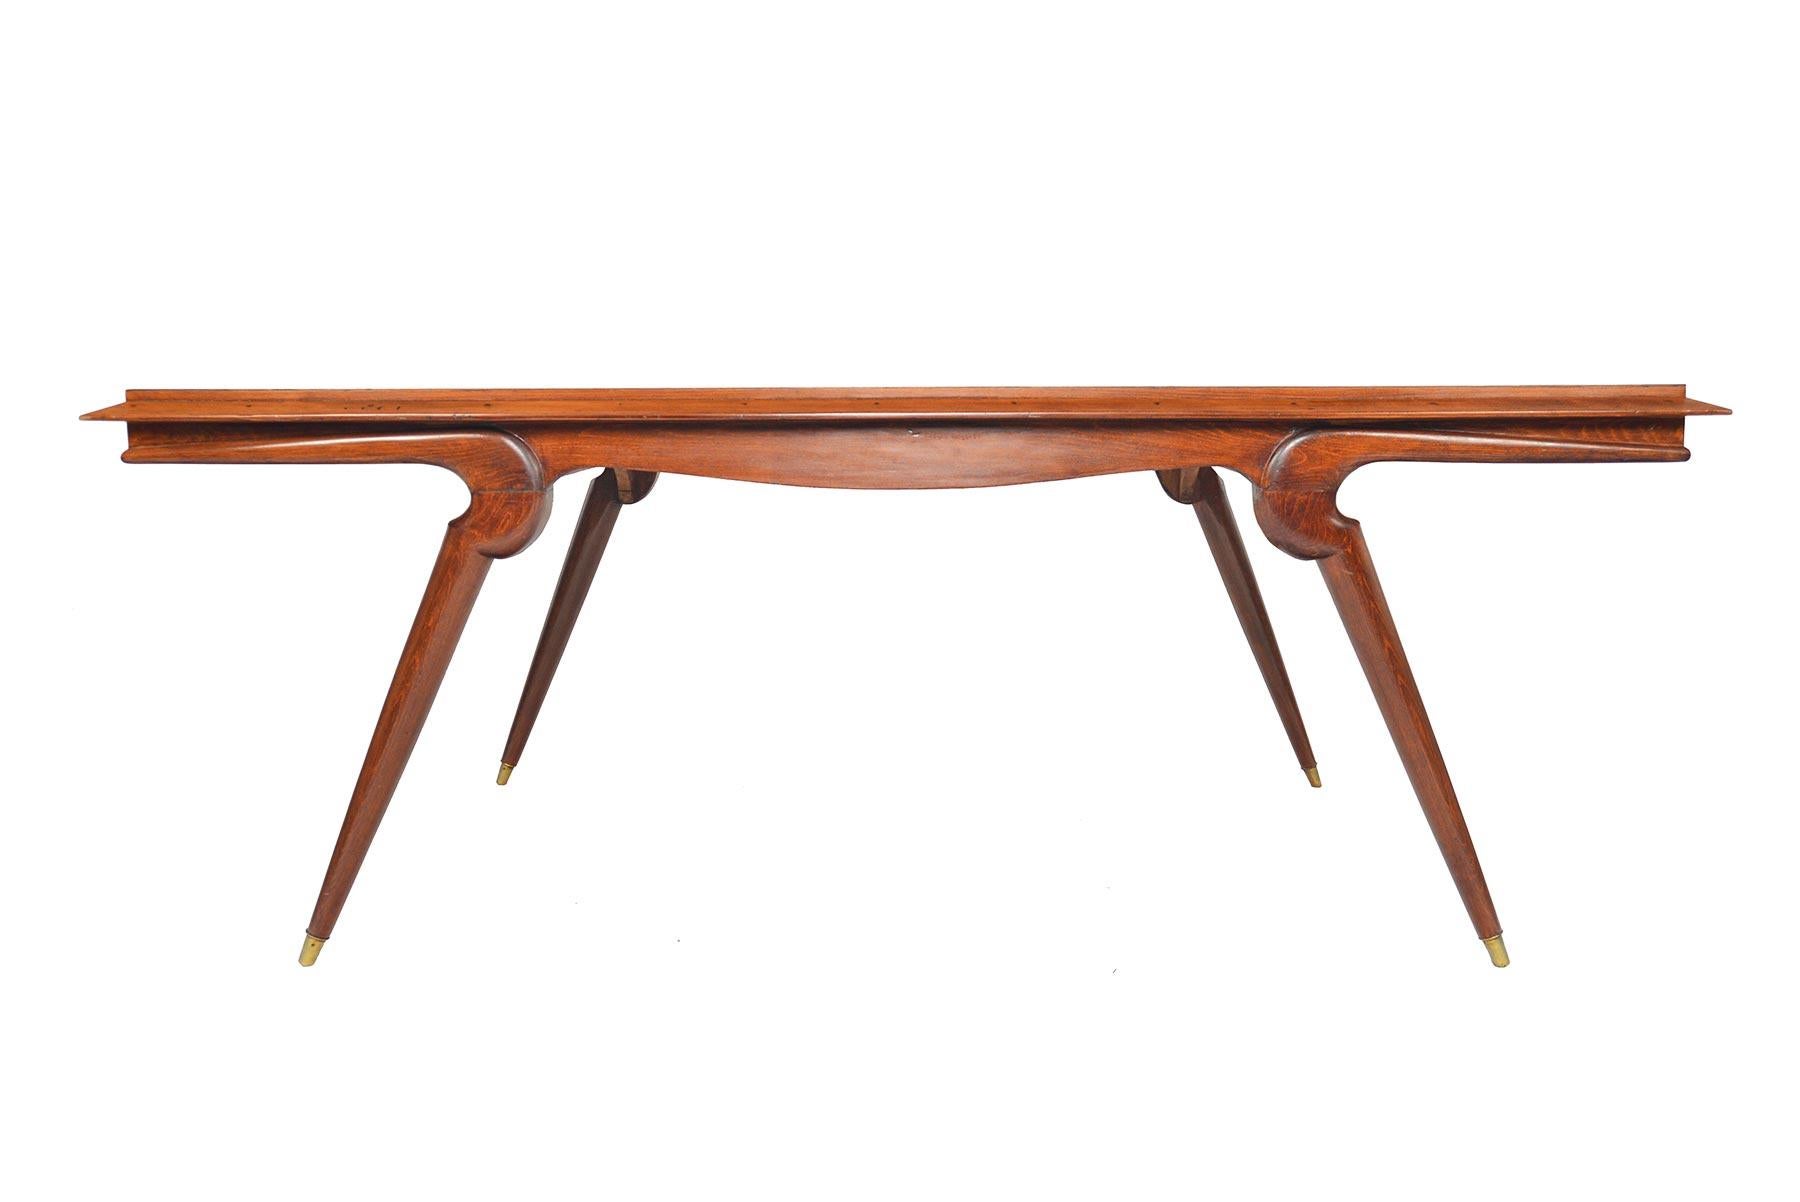 This outstanding Swedish modern “library” table was crafted from stained oak in the 1940s. The large table surface sits a few inches higher than the standard dining table. Table features dramatic saber- shaped legs caped in brass. In excellent